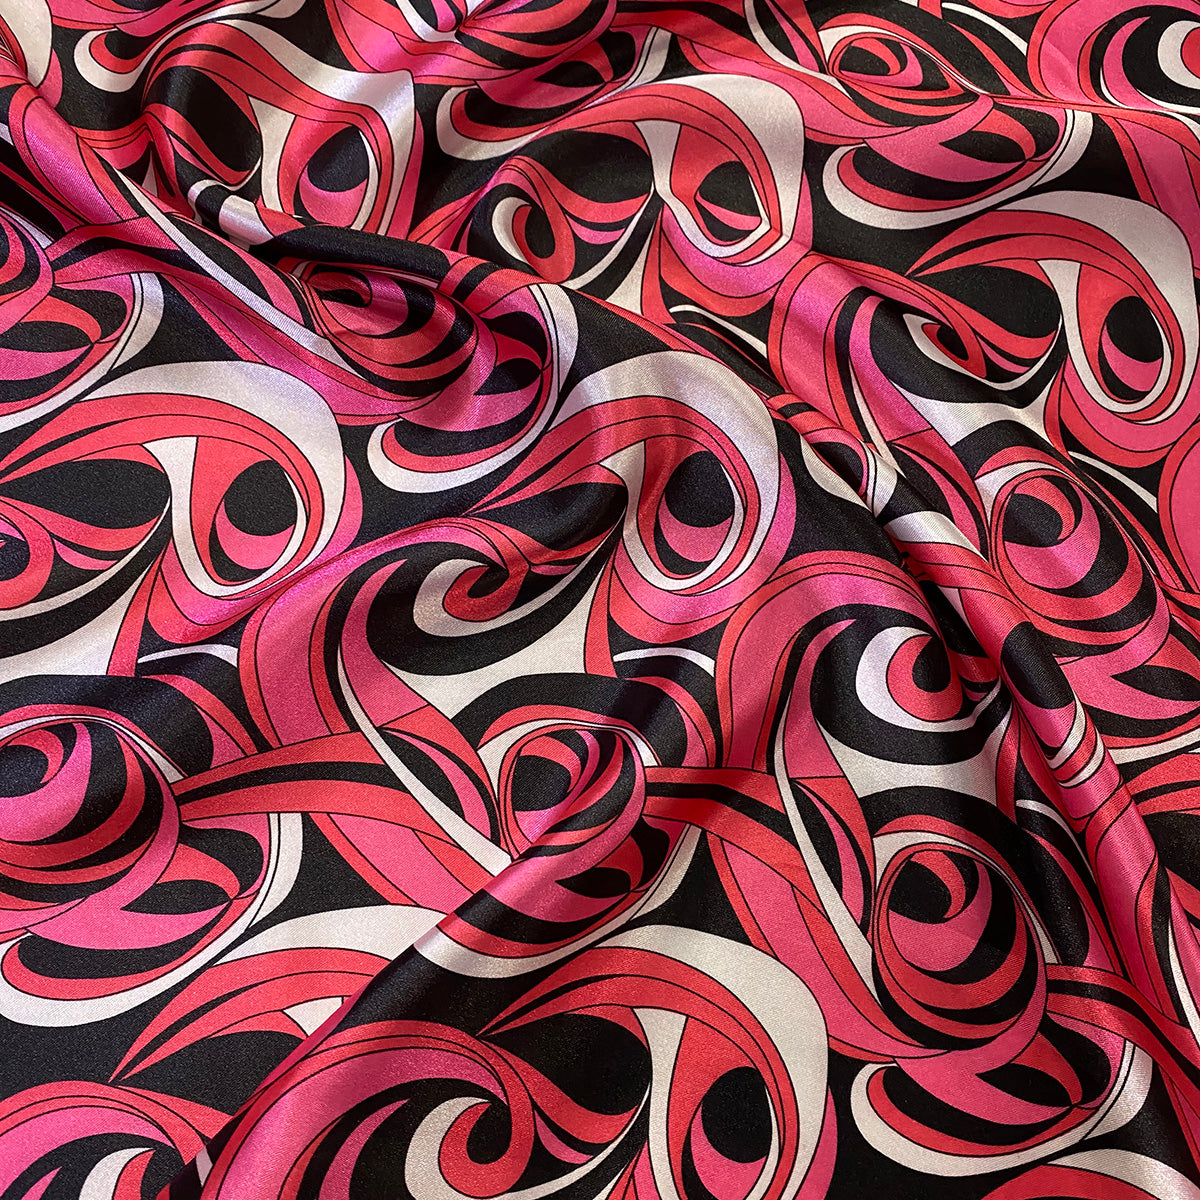 Rayon Fabric, Pucci-Inspired Fiery Hot Pink Psychedelic Rayon